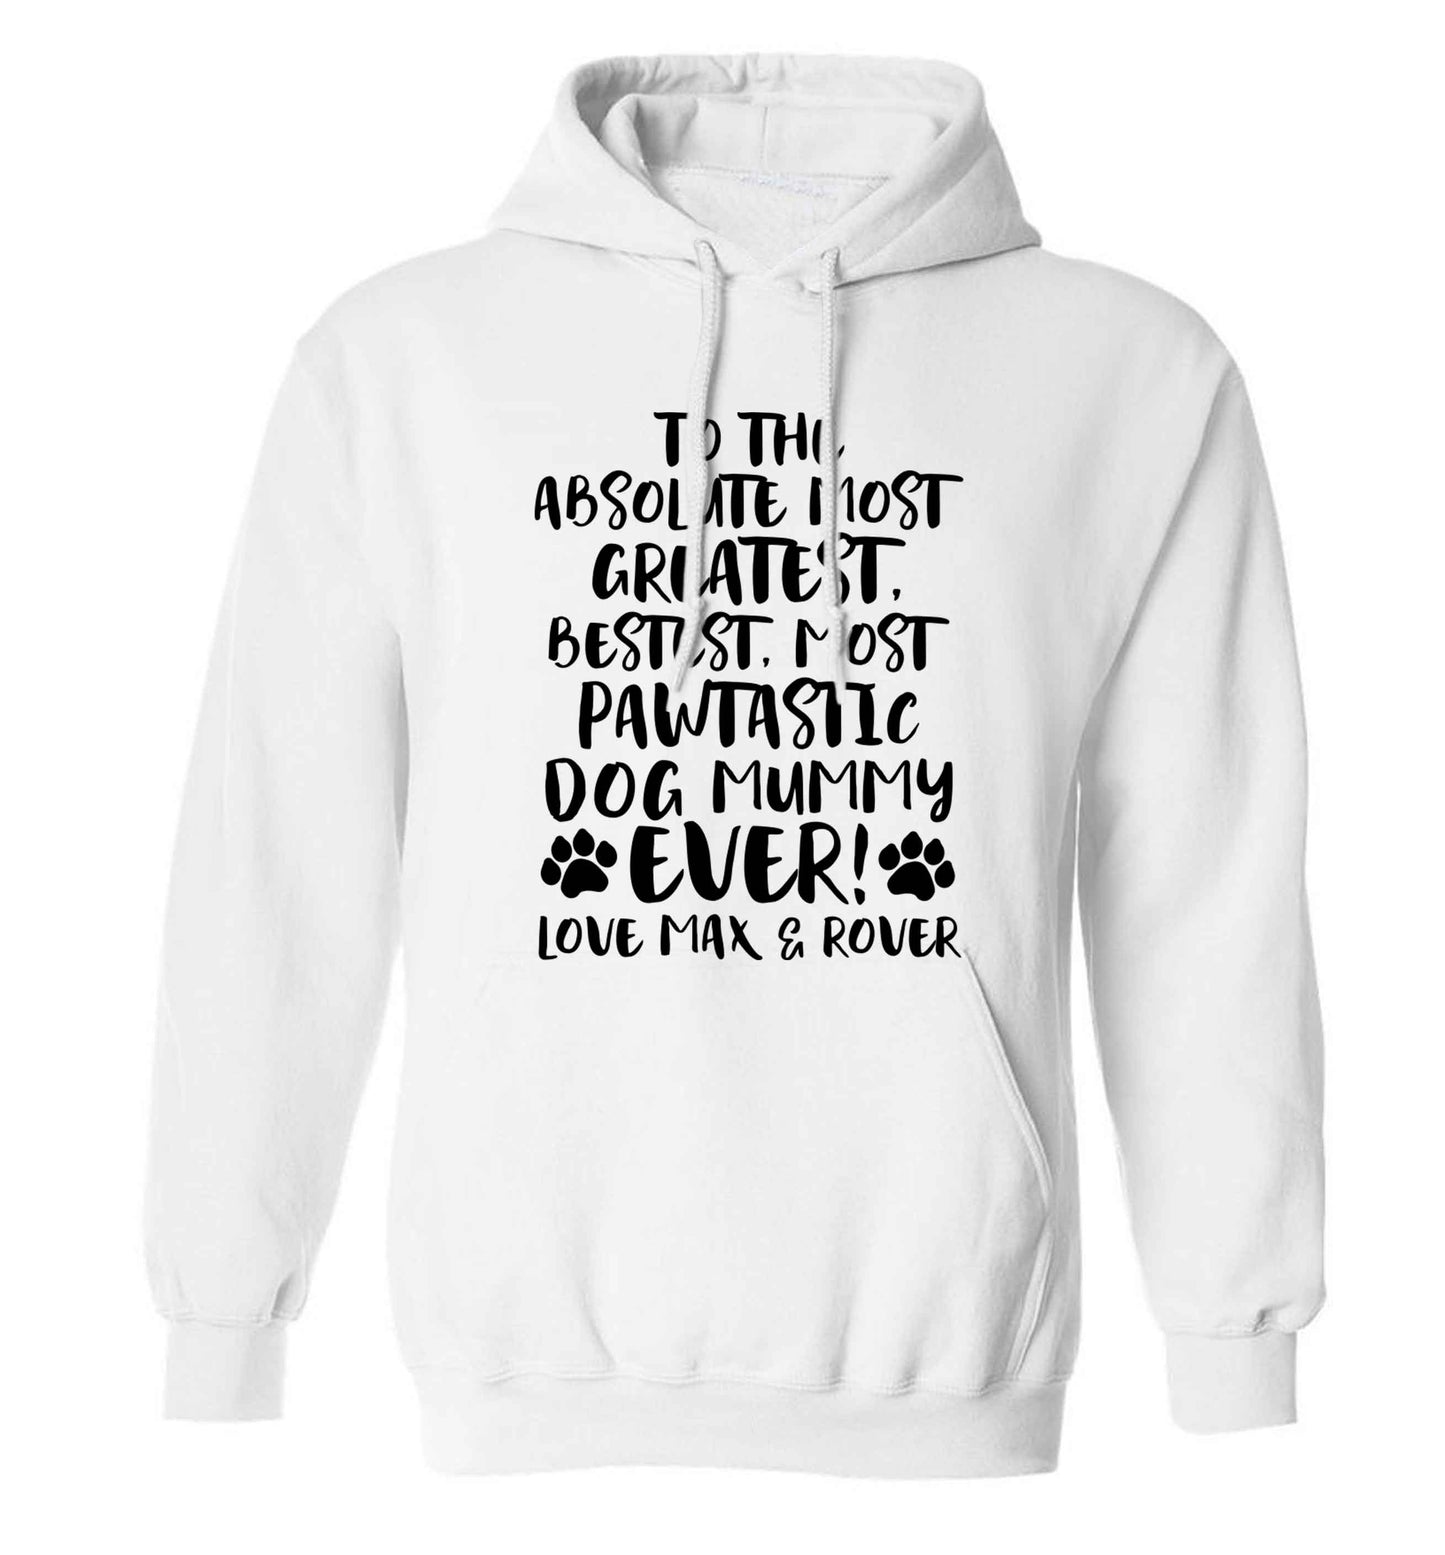 Personalsied to the most pawtastic dog mummy ever adults unisex white hoodie 2XL